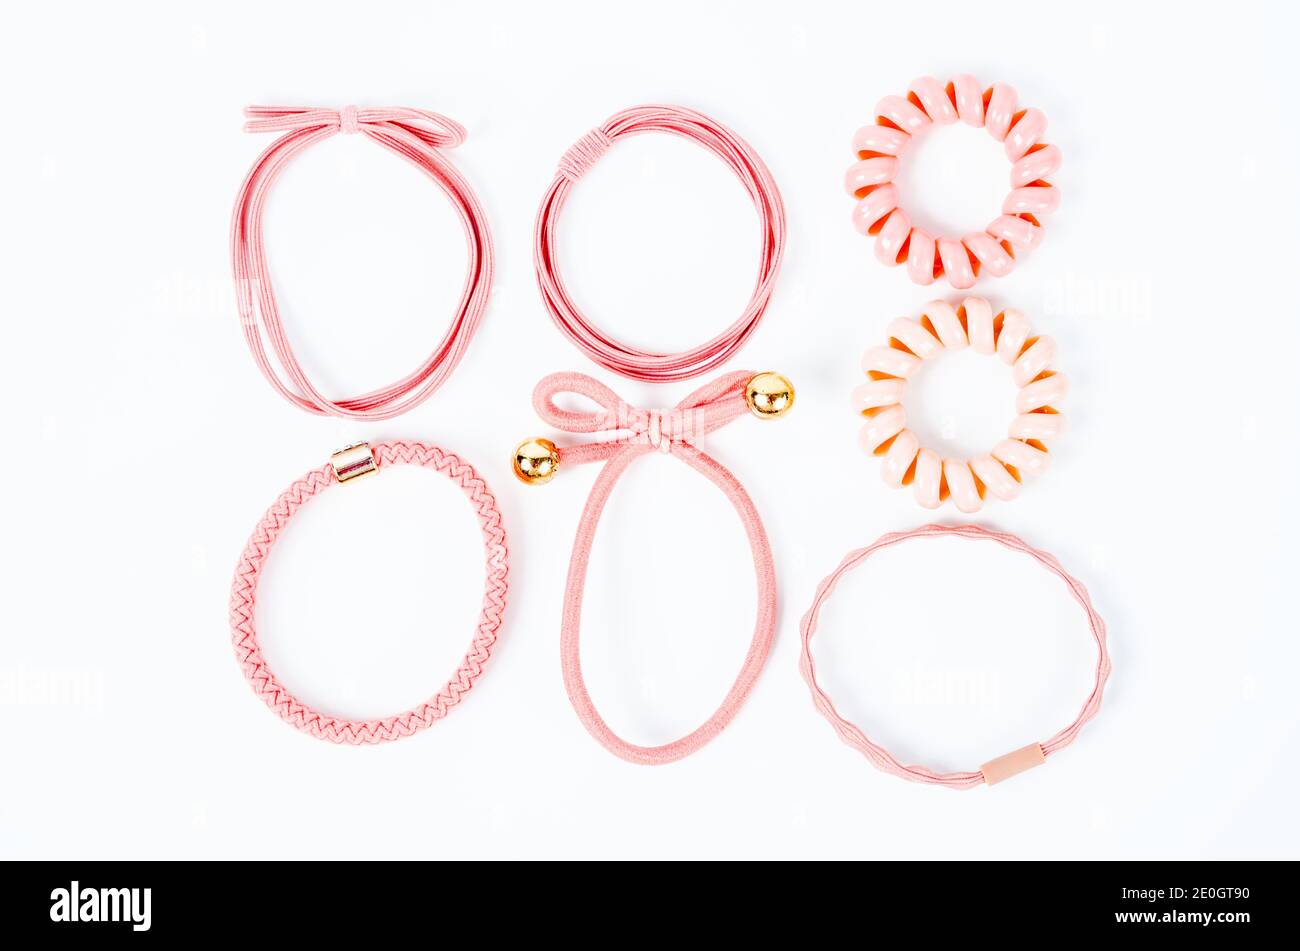 Set of pink fabric rubber bands. Elastic hair ties in vibrant colors on white background. Stock Photo